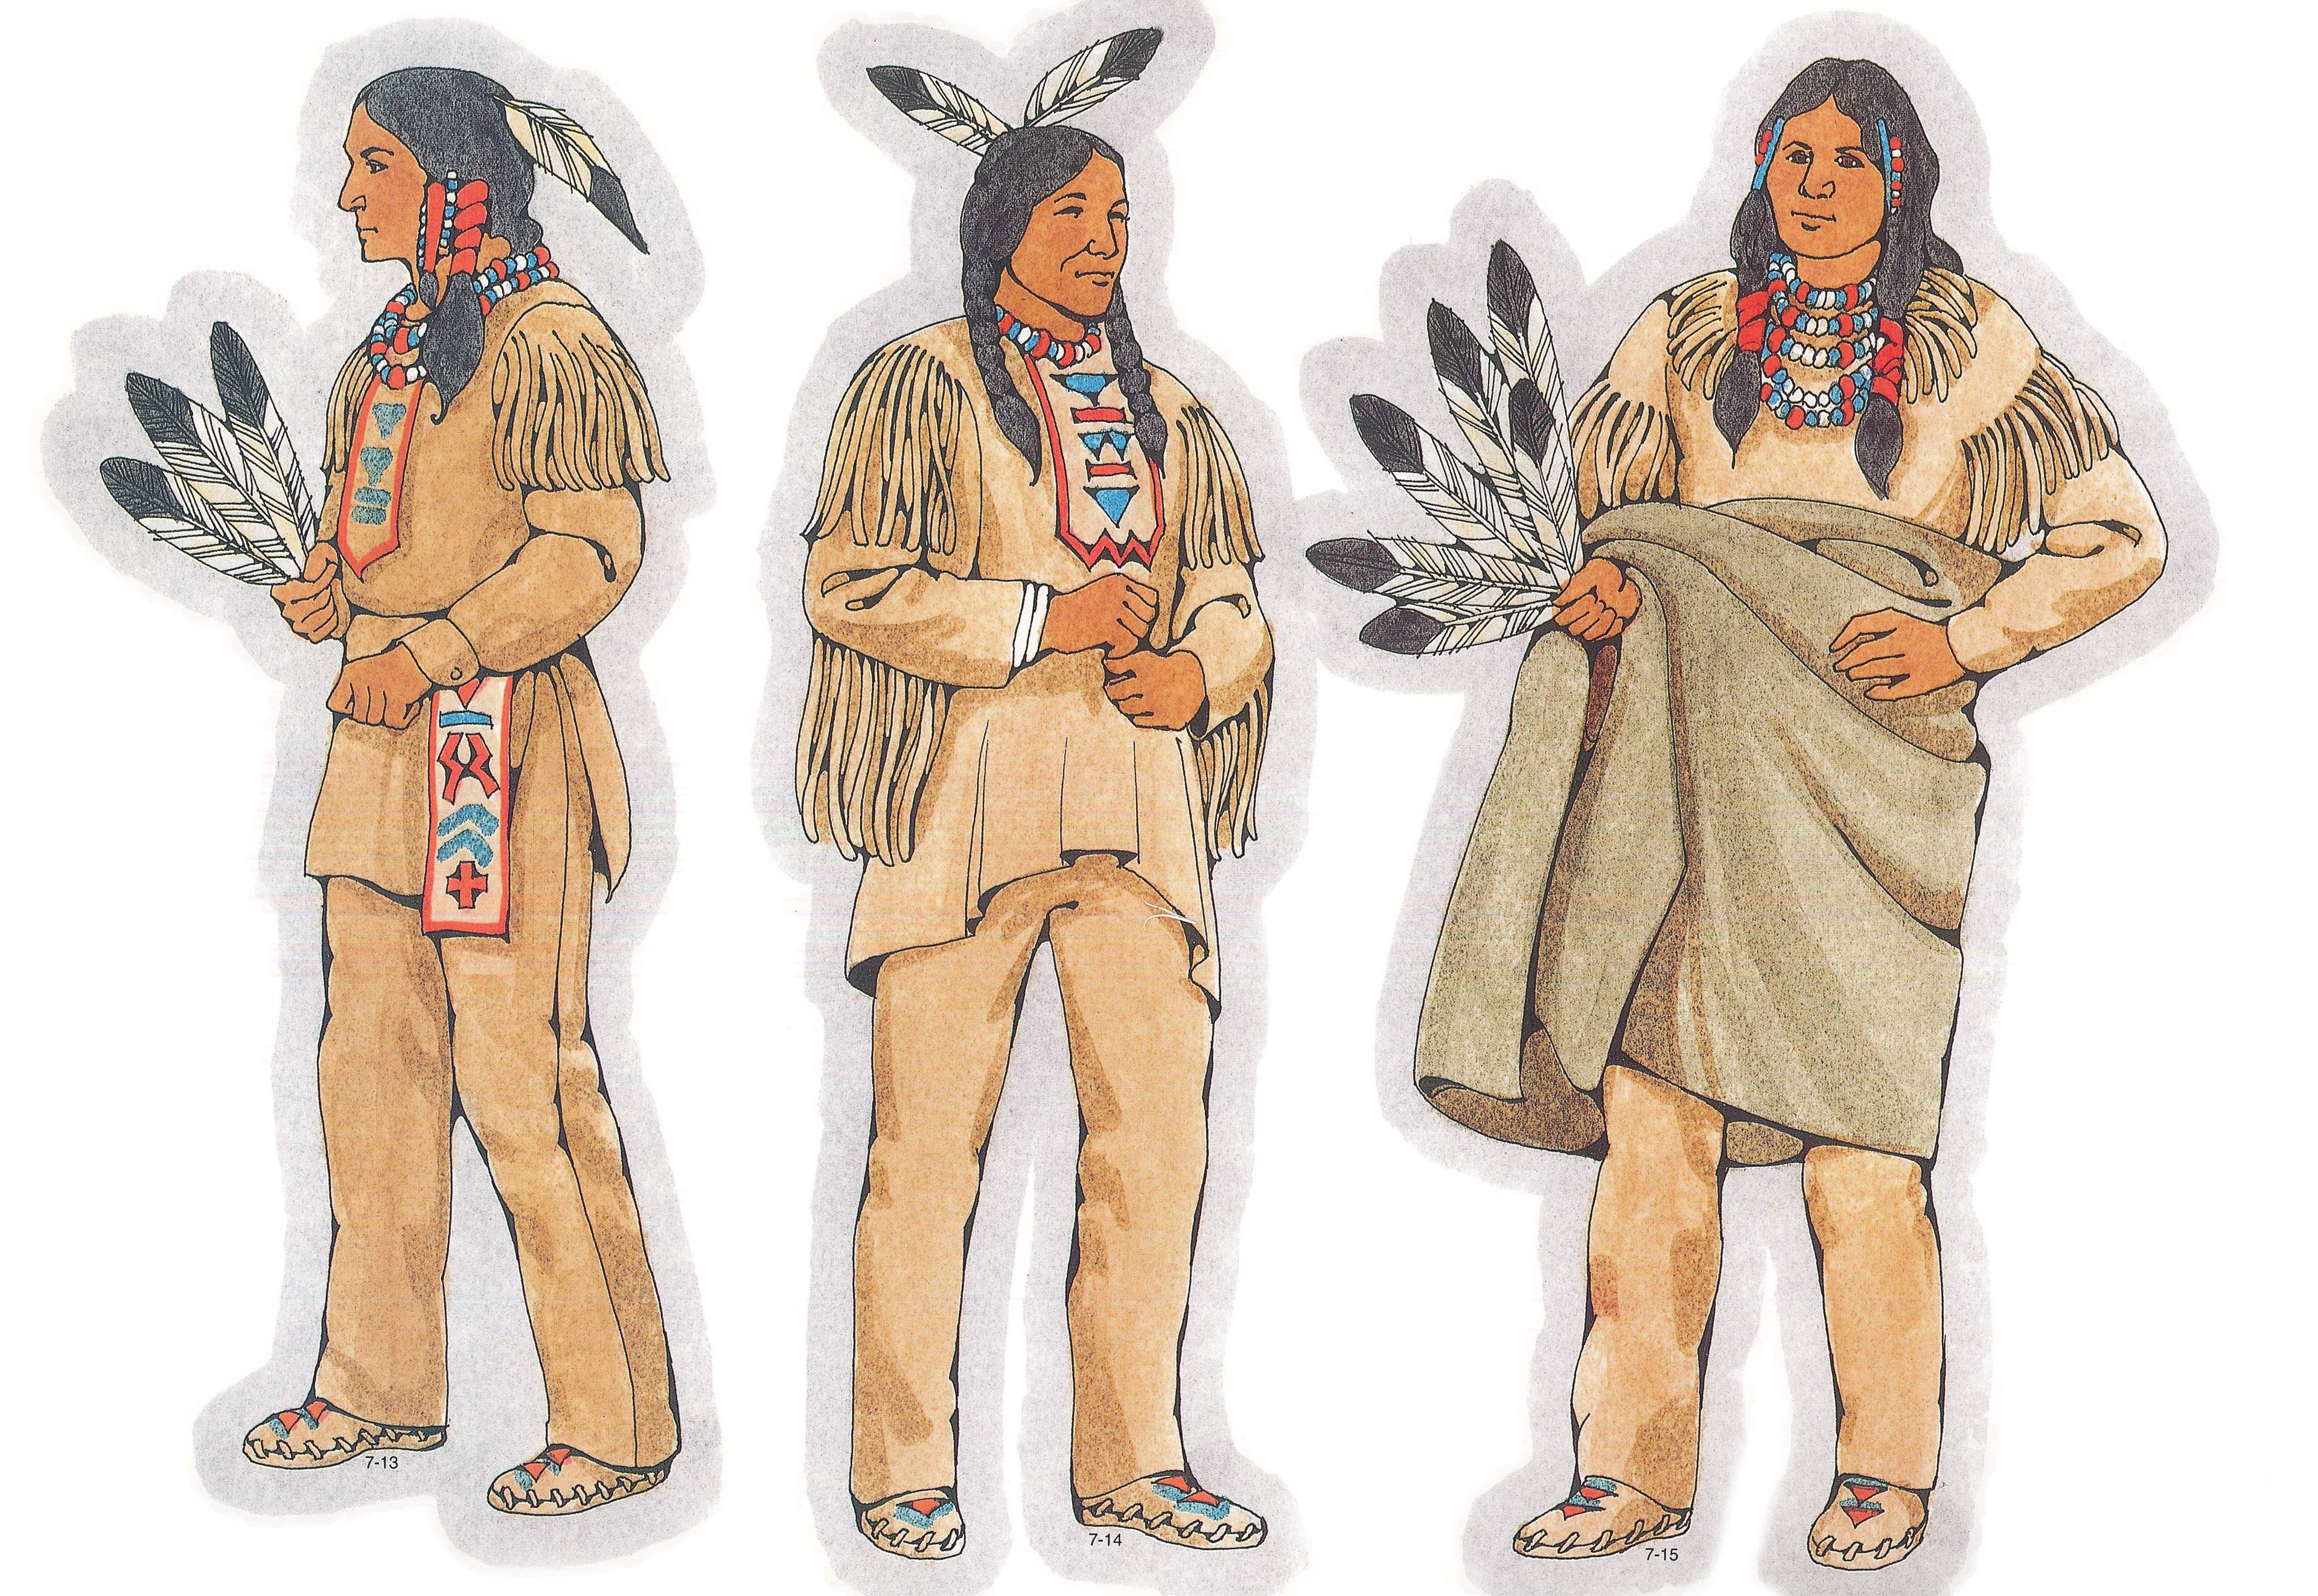 Primary Visual Aids: Cutouts 7-13, Man with Three Feathers; 7-14, Man; 7-15, Man Holding Blanket and Feathers.